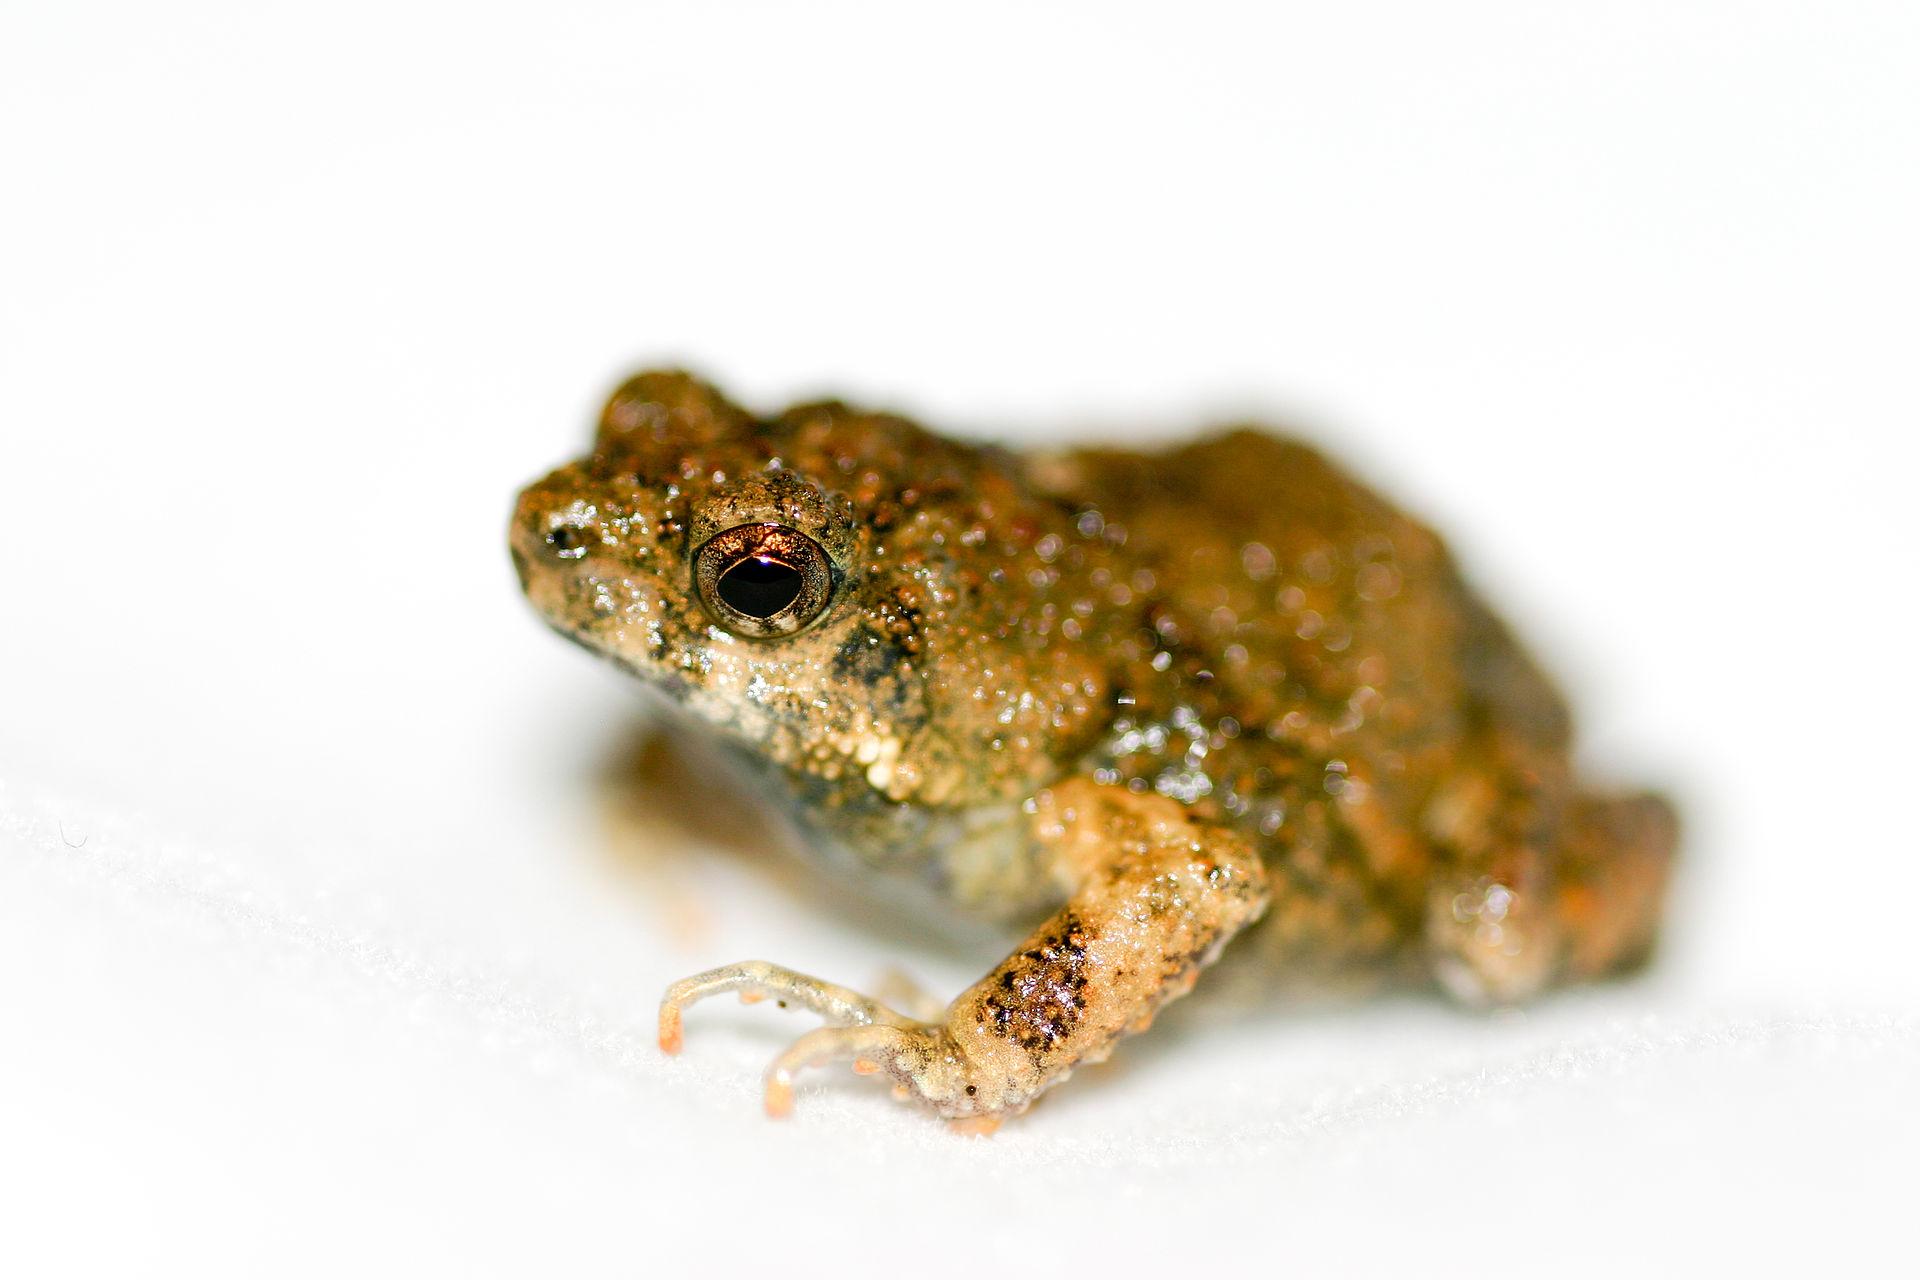 Behind the túranga frog’s sophisticated number sense, scientists have found, are specialised cells located in the amphibian midbrain